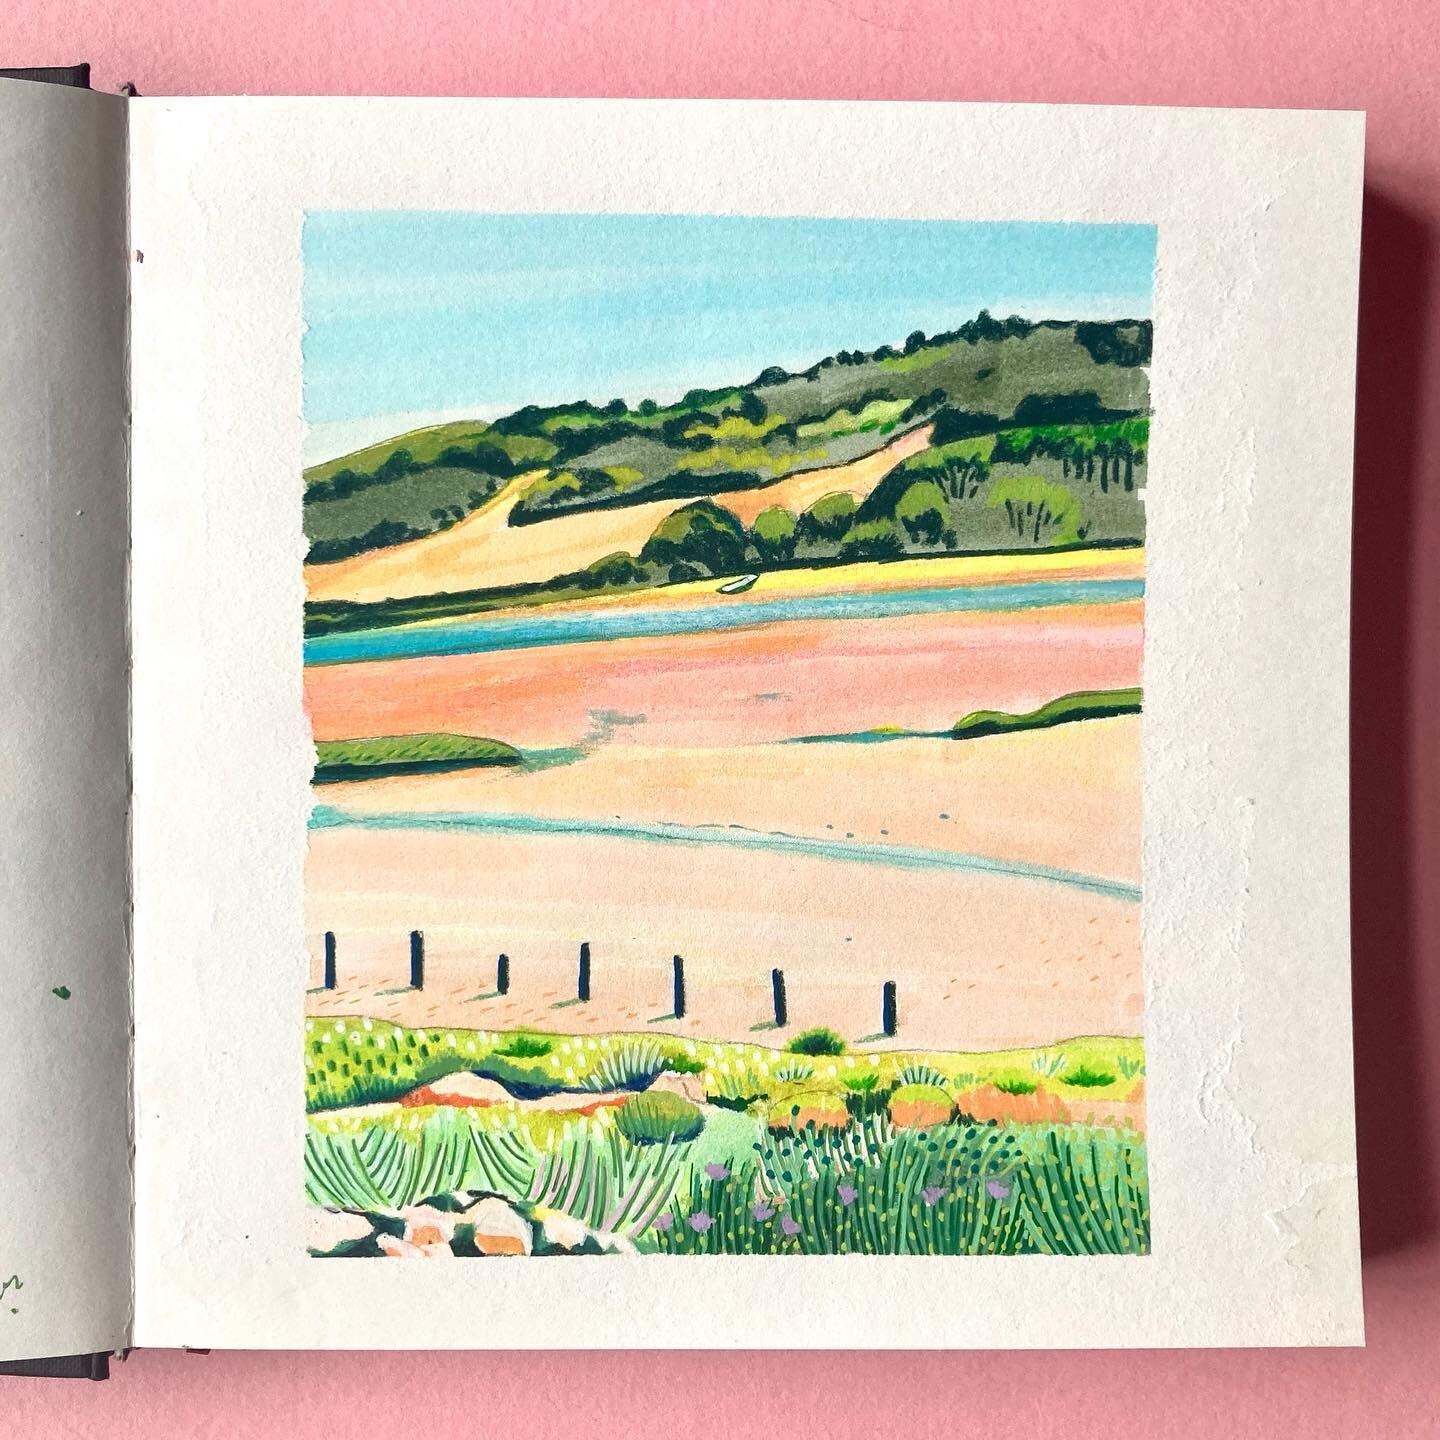 The one drawing I managed to do from our holiday in Devon. Seaton wetlands. Such a beautiful place. 
.
.
.
#sketchbook #landscapepainting #sketchbookpage #locationdrawing #art #artforyourhome #artforsale #illustration #illustrationartists #illustrato